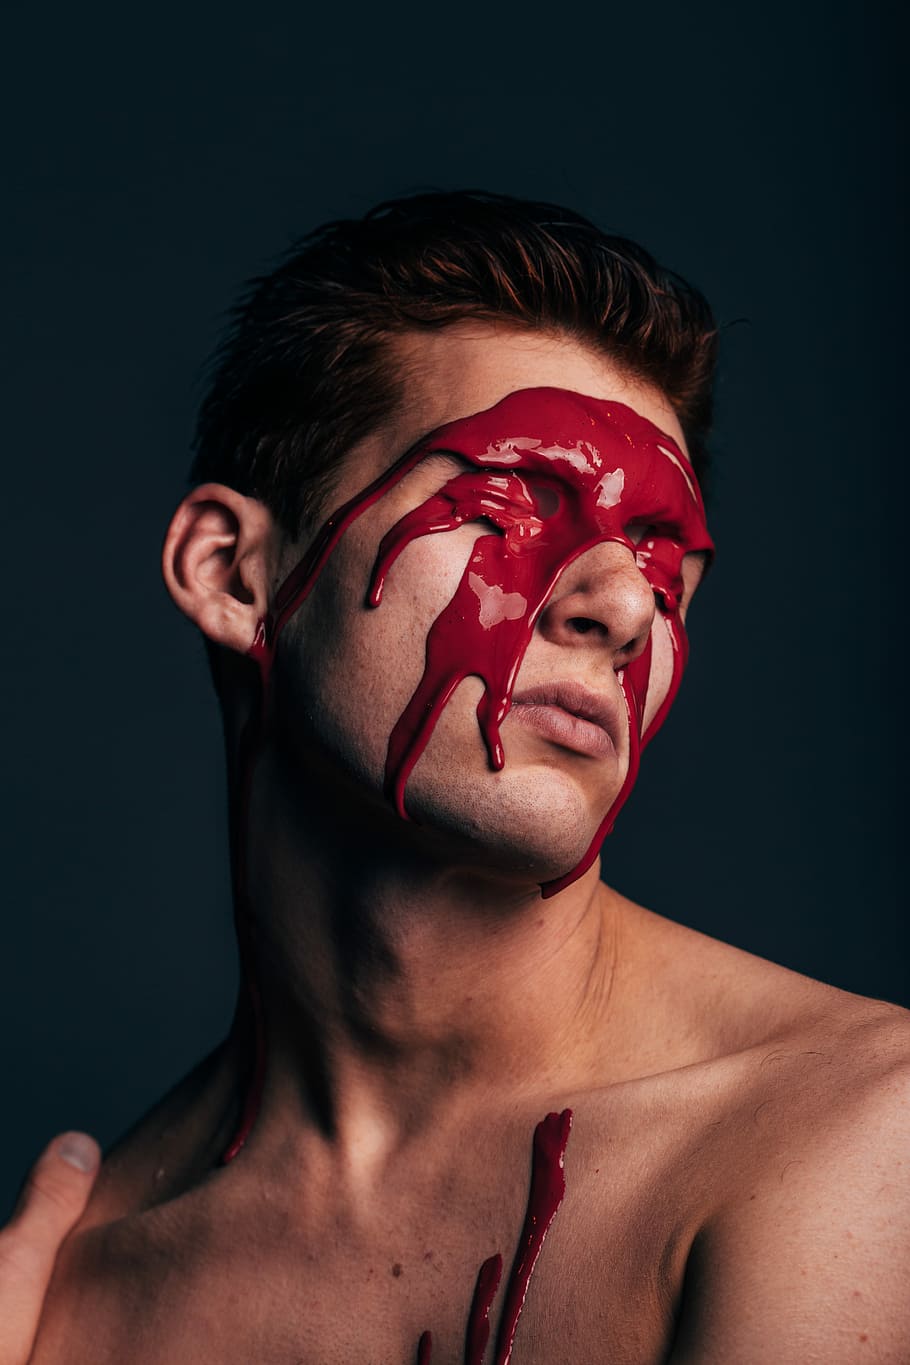 photo of man's face, man with red paint on face covered his eyes photo